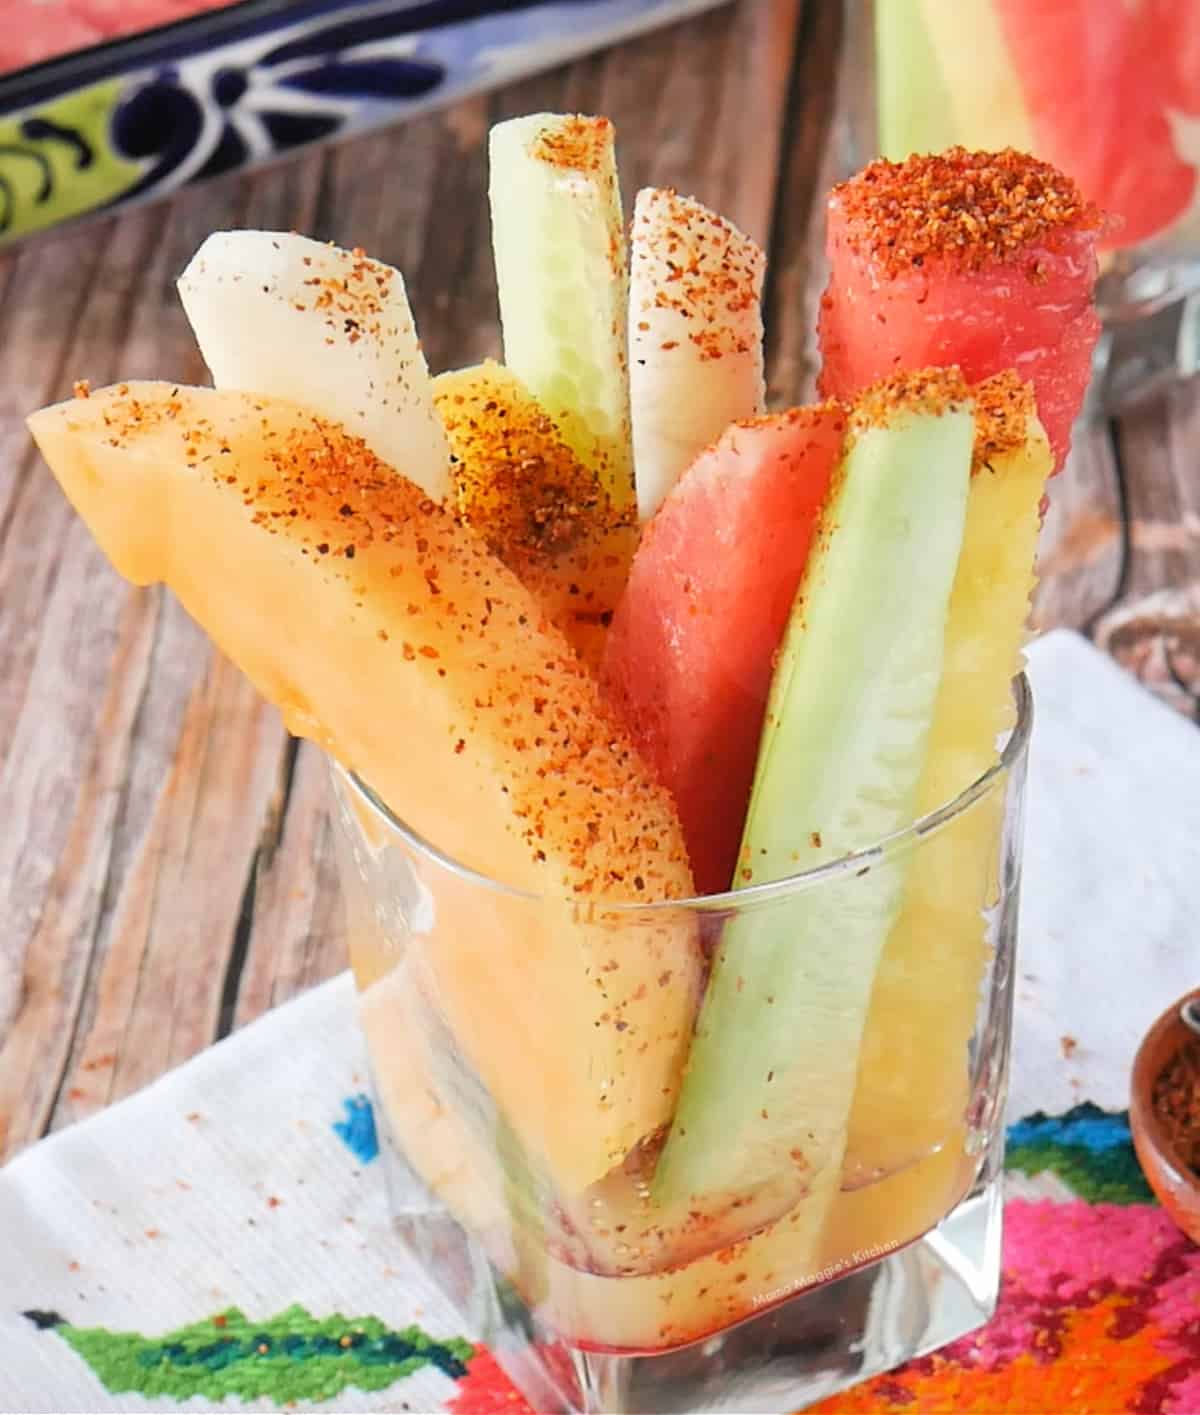 A glass cup full of fruit and sprinkled with Tajin.